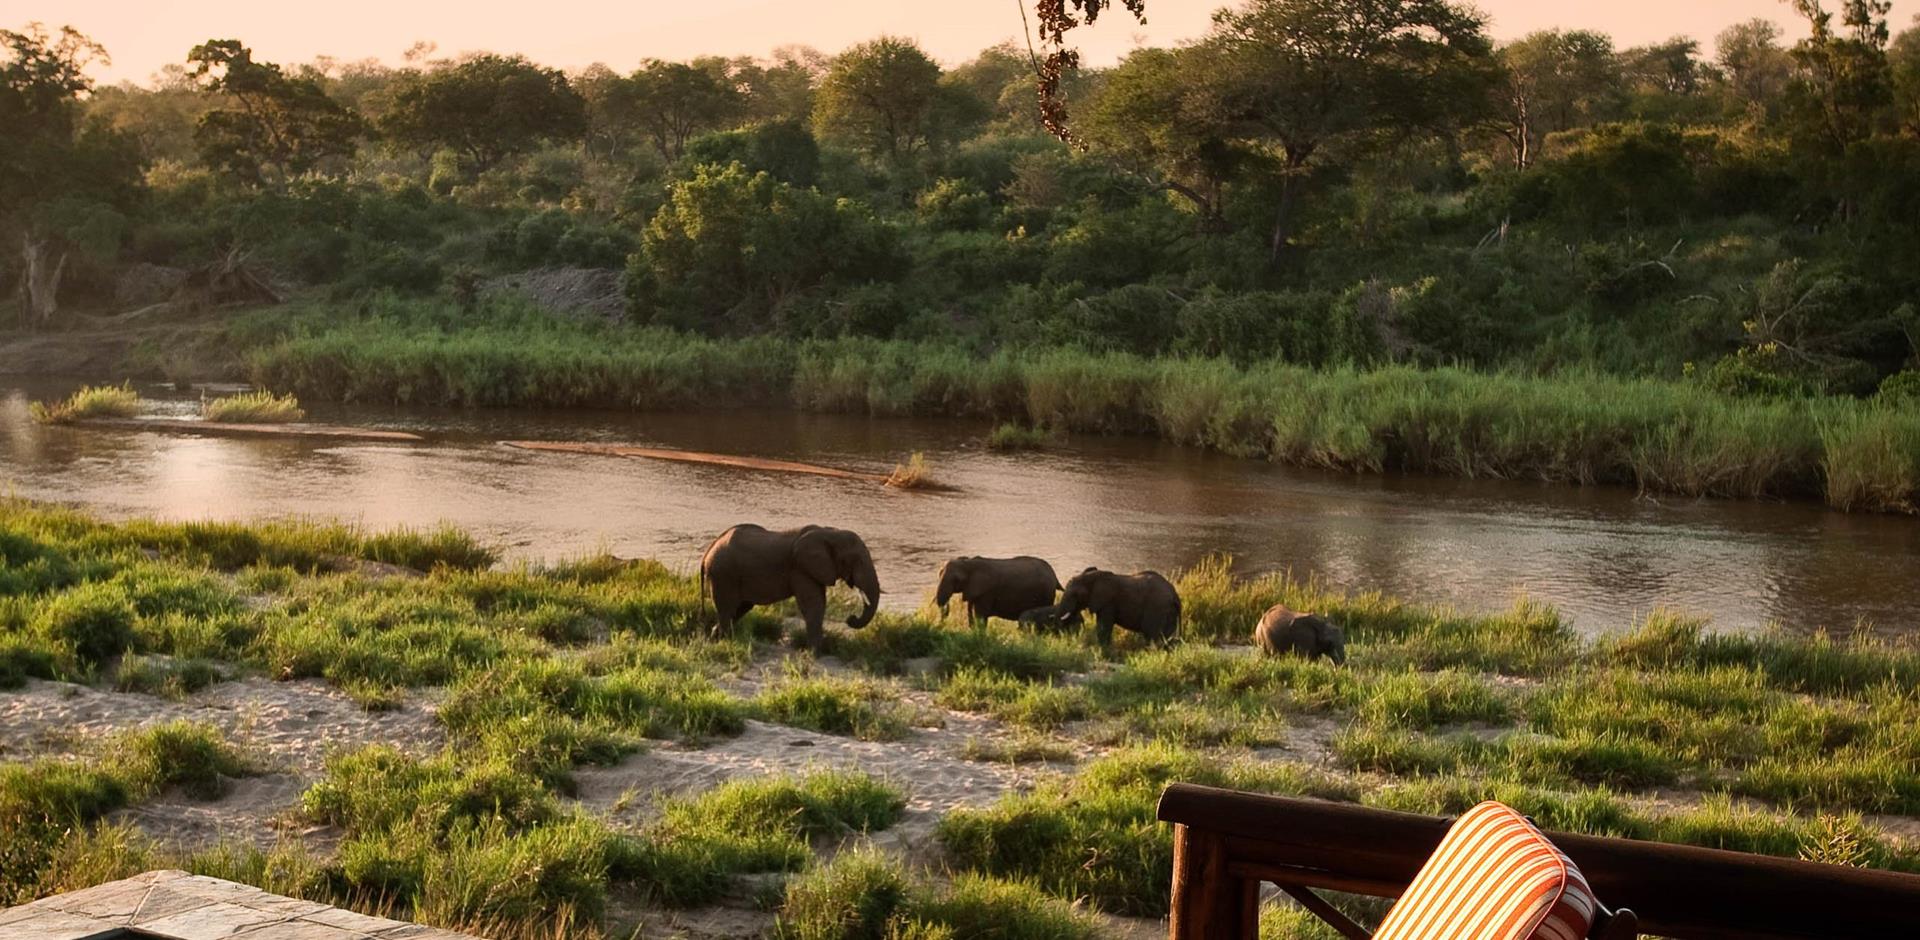 Elephant viewing, Lion Sands Narina Lodge, South Africa, A&K